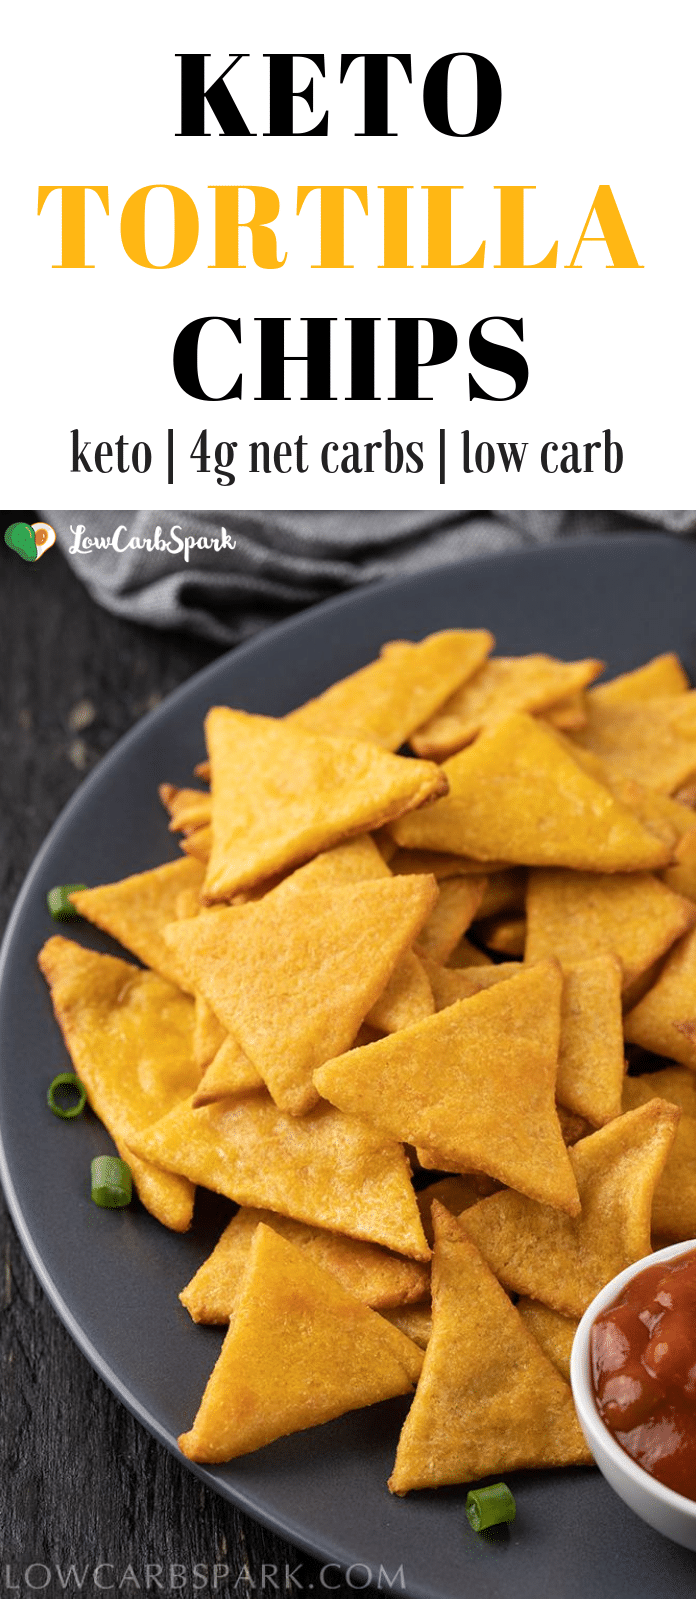 These keto tortilla chips are super easy to make, cruncy and perfect for snacking!